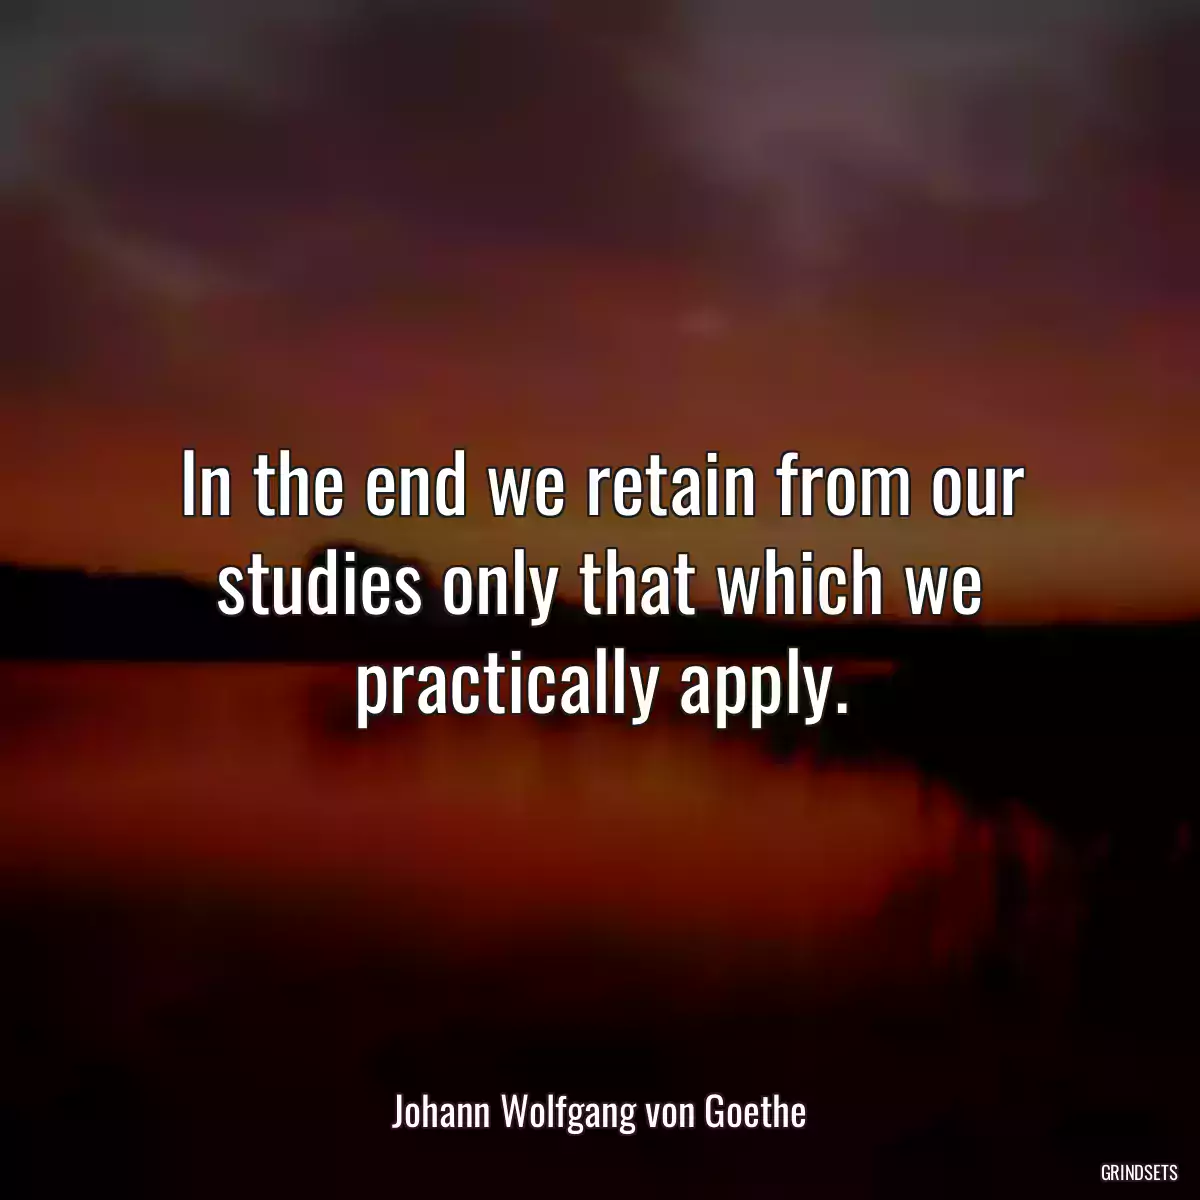 In the end we retain from our studies only that which we practically apply.